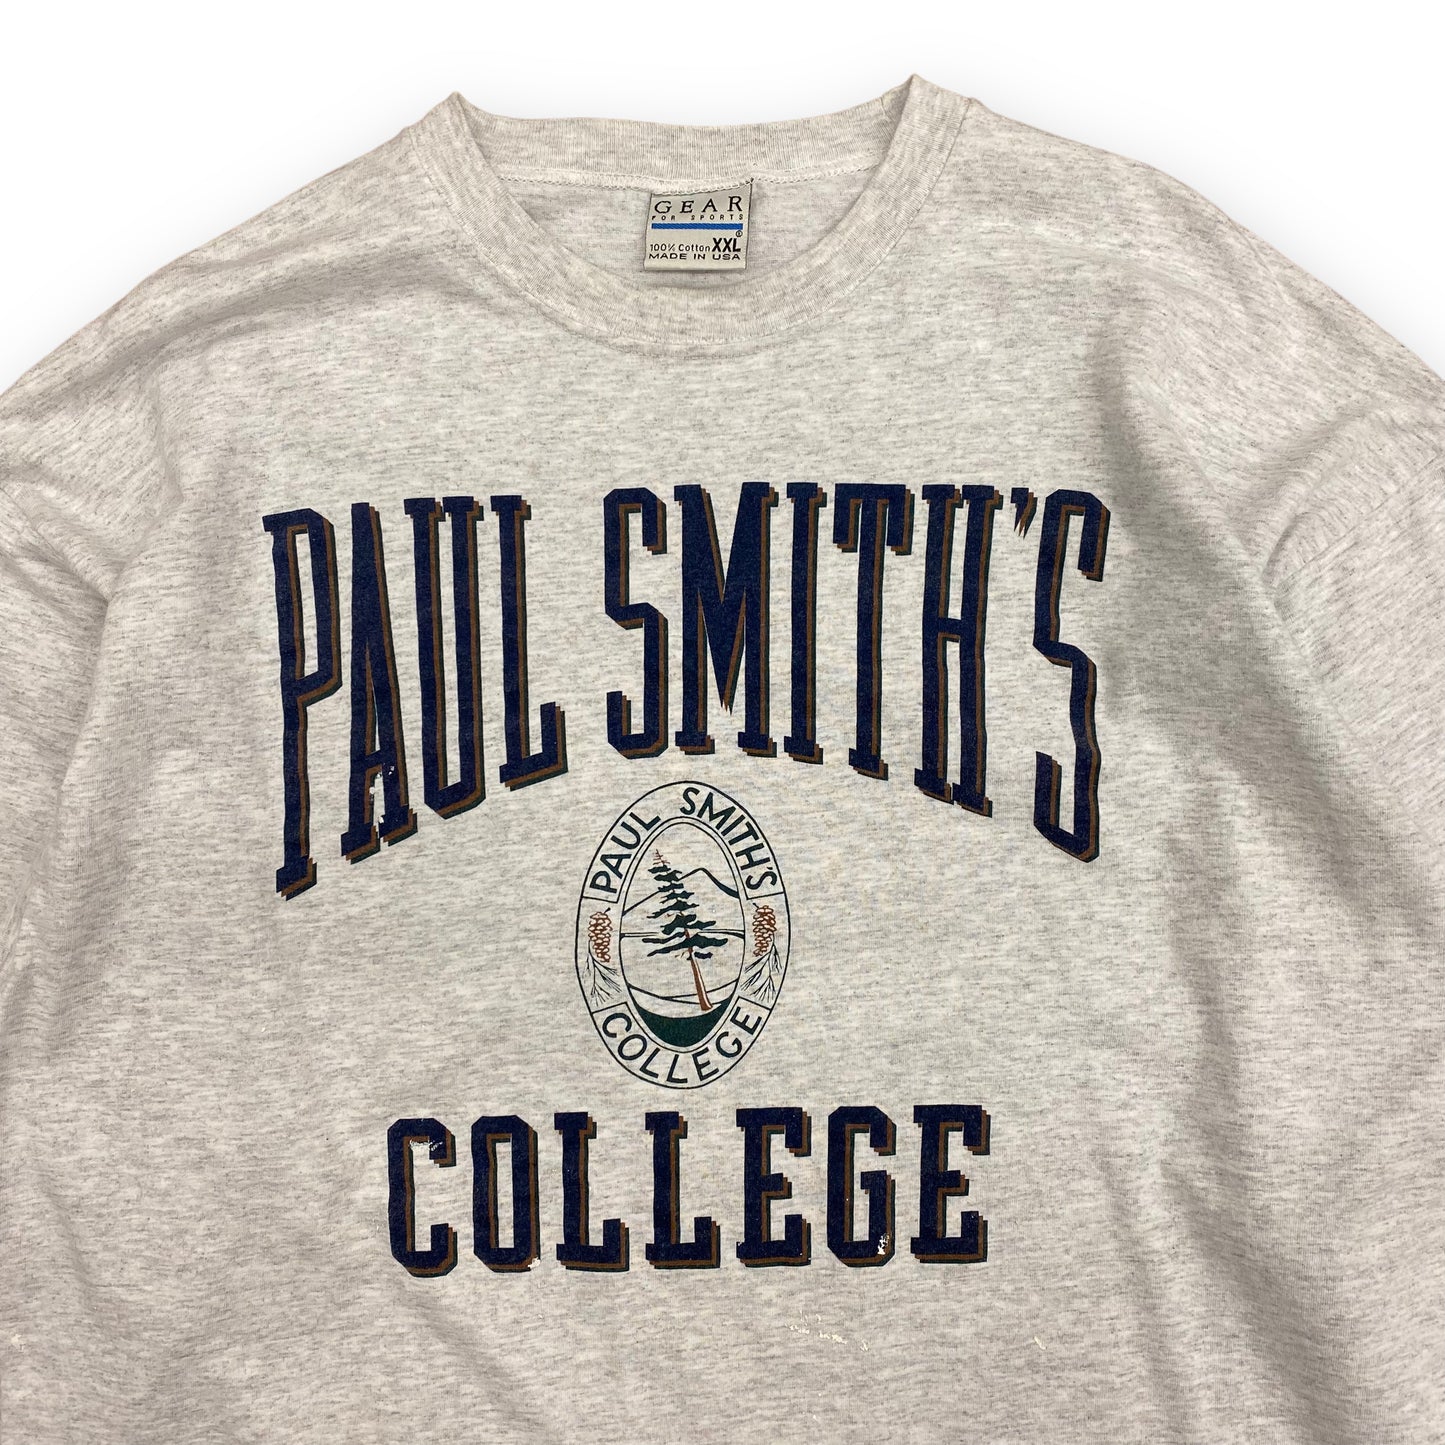 Vintage 1990s Paul Smith's College Gray Long Sleeve - Size XXL (Fits XL)